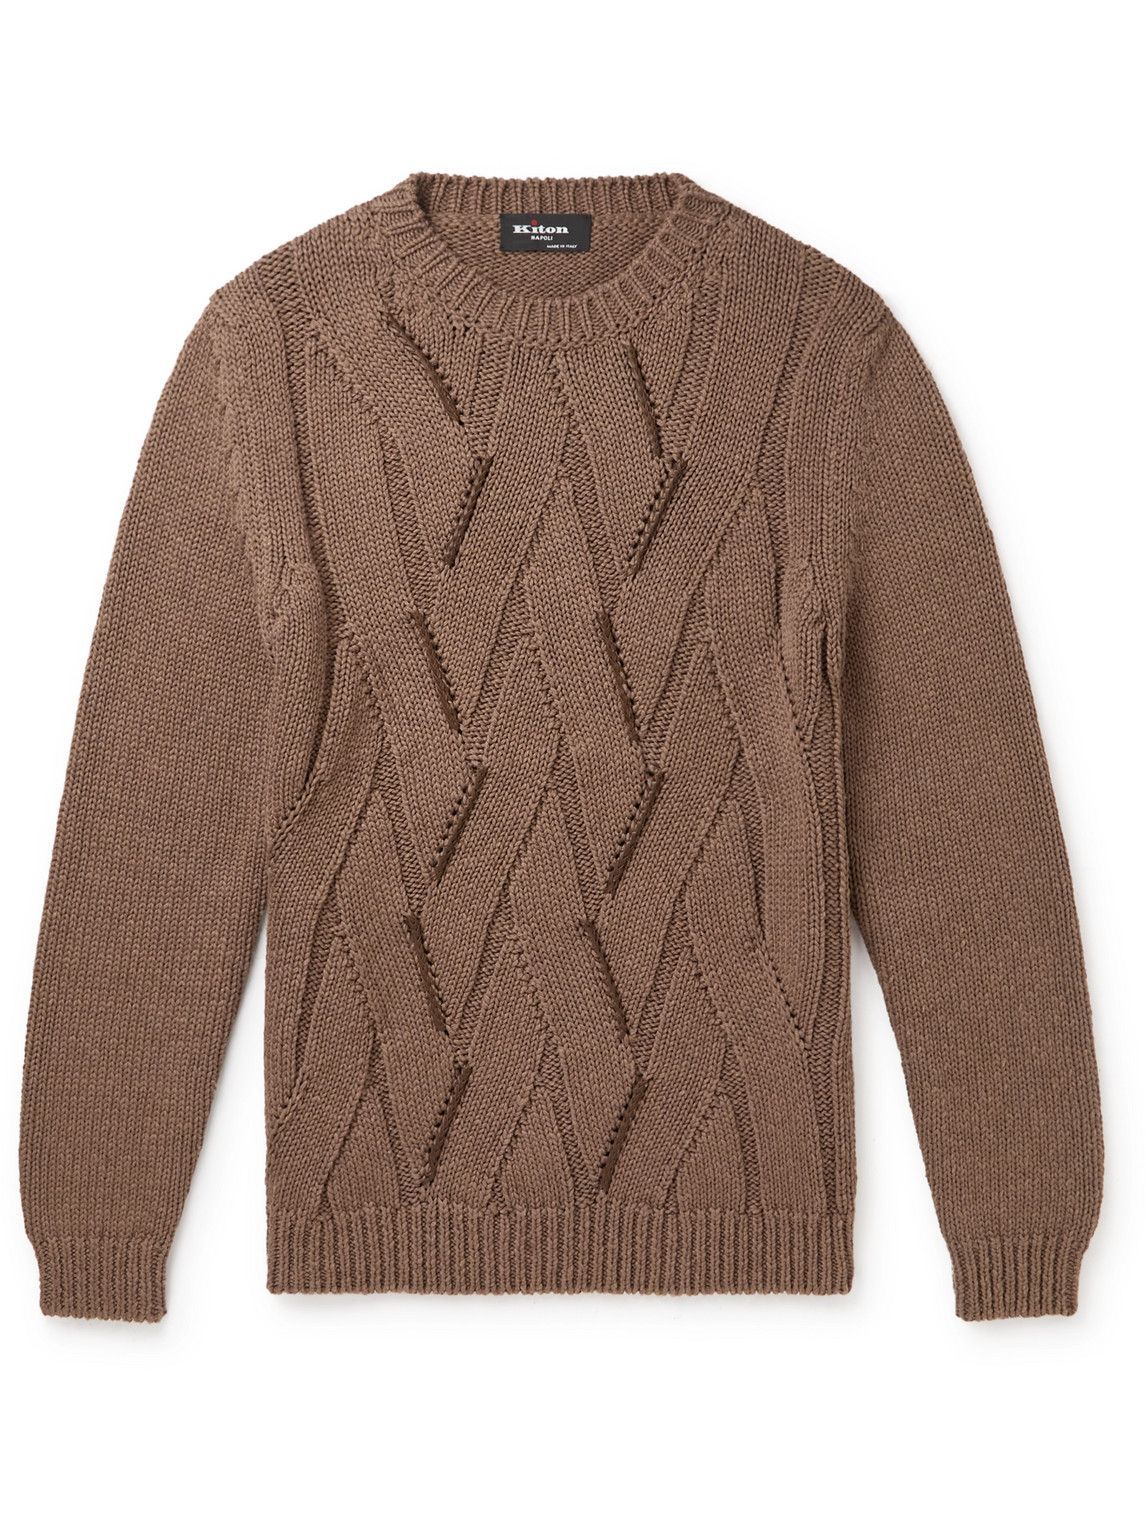 Photo: Kiton - Leather-Trimmed Cable-Knit Cotton and Linen-Blend Sweater - Brown